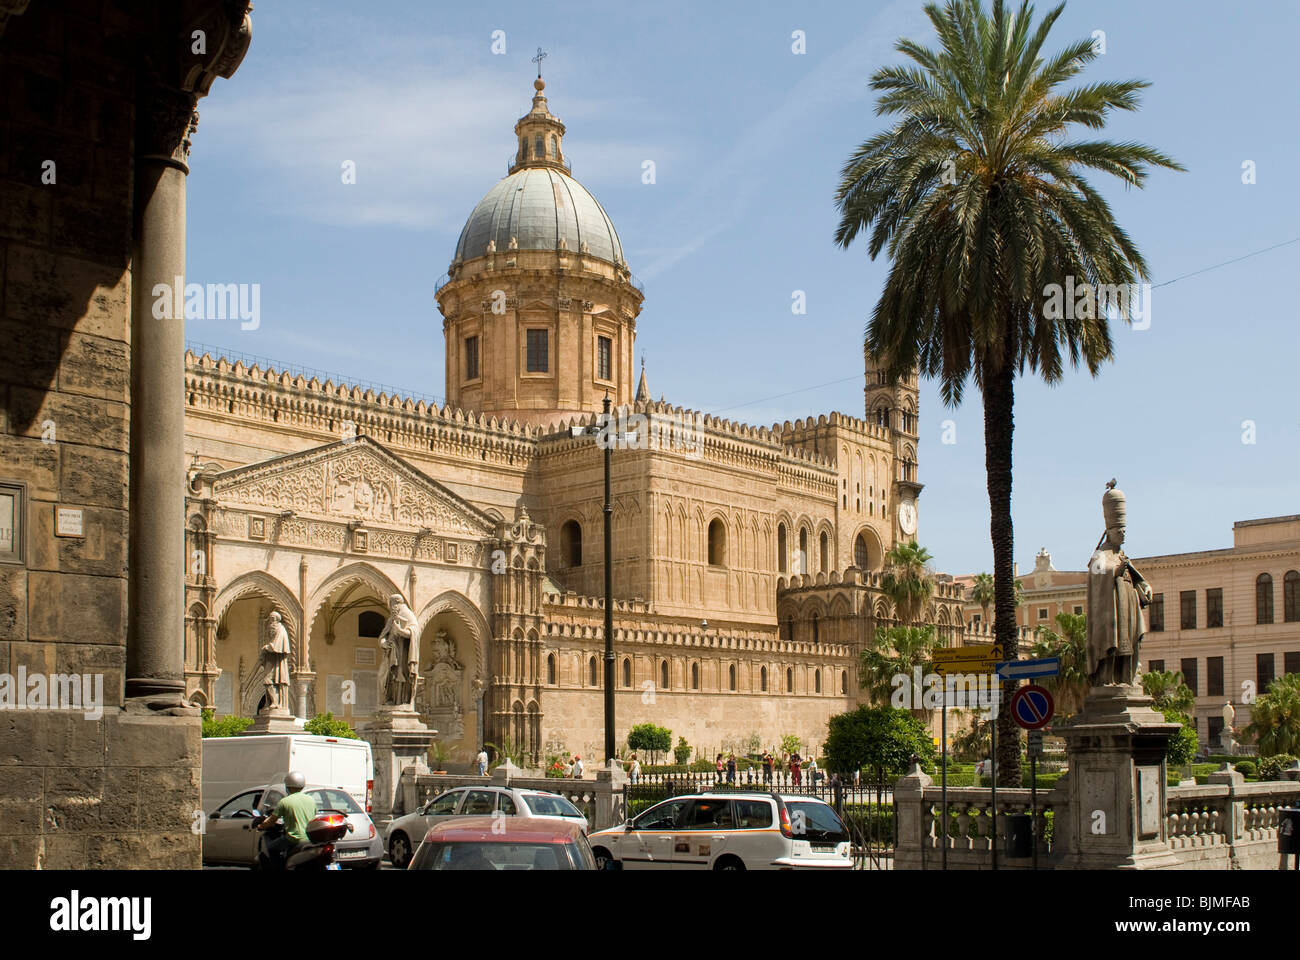 Italien, Sizilien, Palermo, Kathedrale | Italy, Sicily, Palermo, cathedral Stock Photo